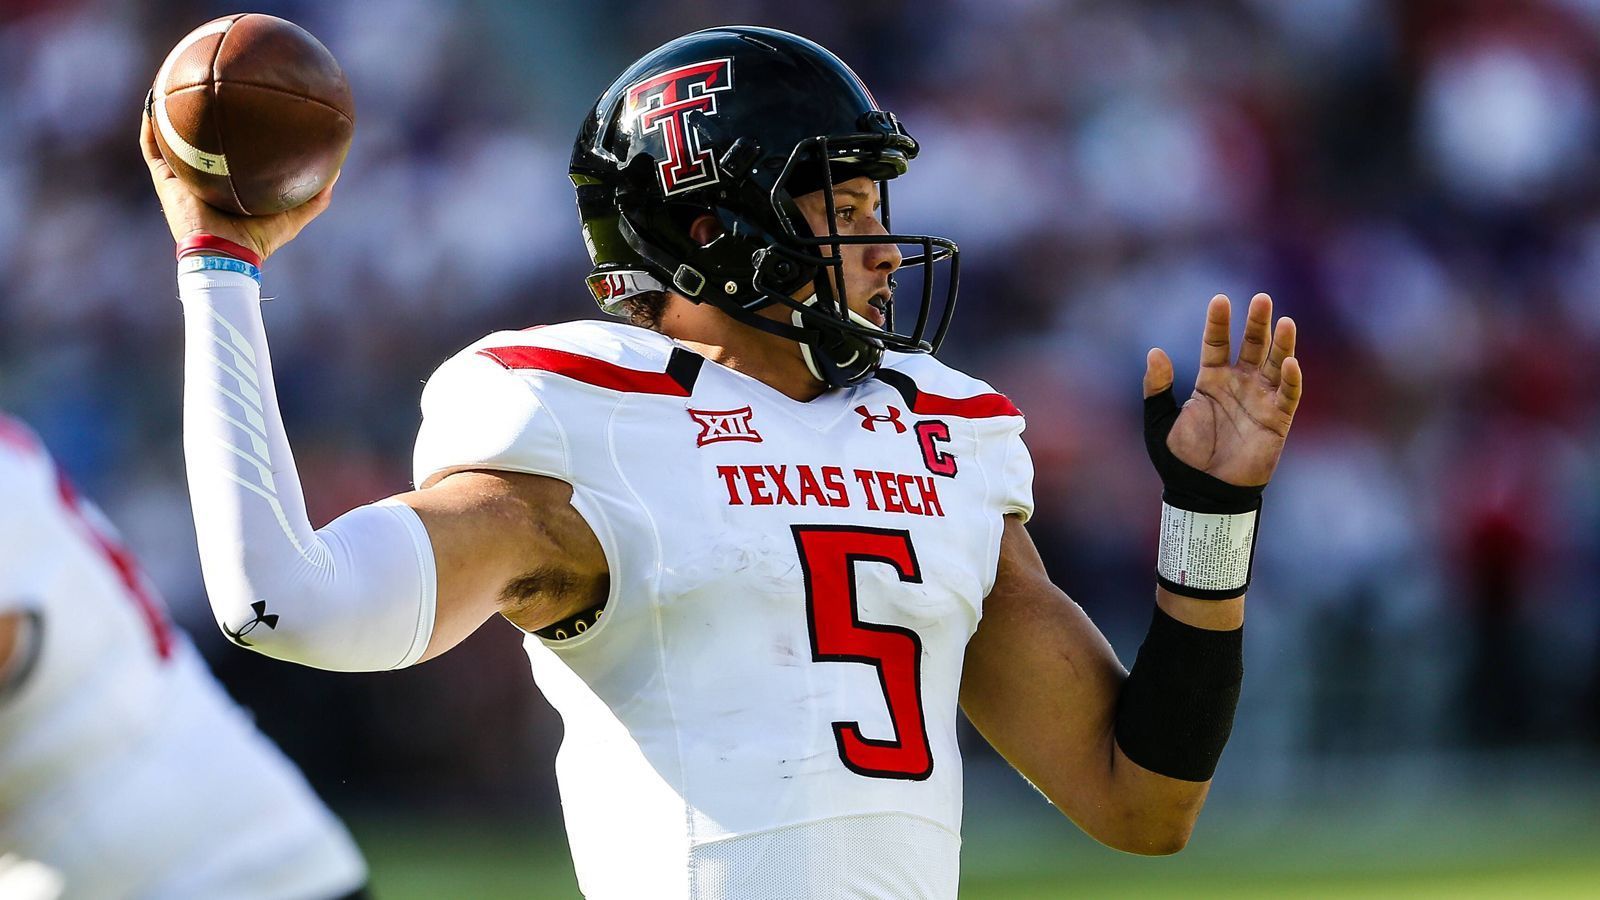 
                <strong>Die meisten Yards in einem Spiel</strong><br>
                Patrick Mahomes (Texas Tech Red Raiders)22. Oktober 2016: Texas Tech vs. Oklahoma, 819 Yards (734 Passing Yards, 85 Rushing Yards)
              